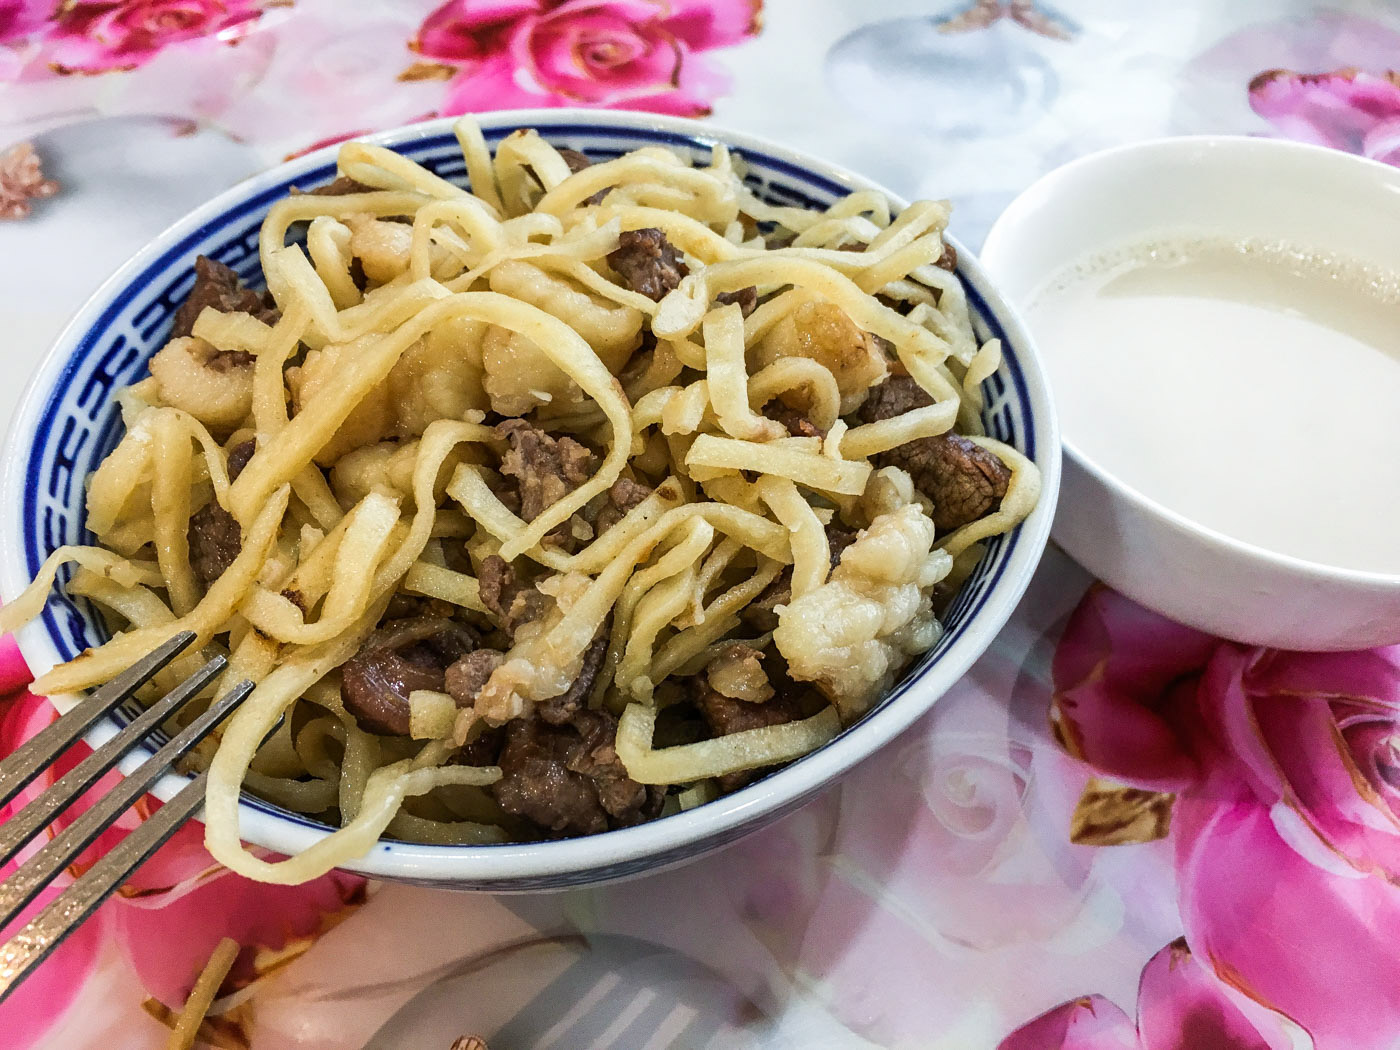 Tsuivan is a noodle dish that is usually prepared with mutton and vegetables. Here served with airag.